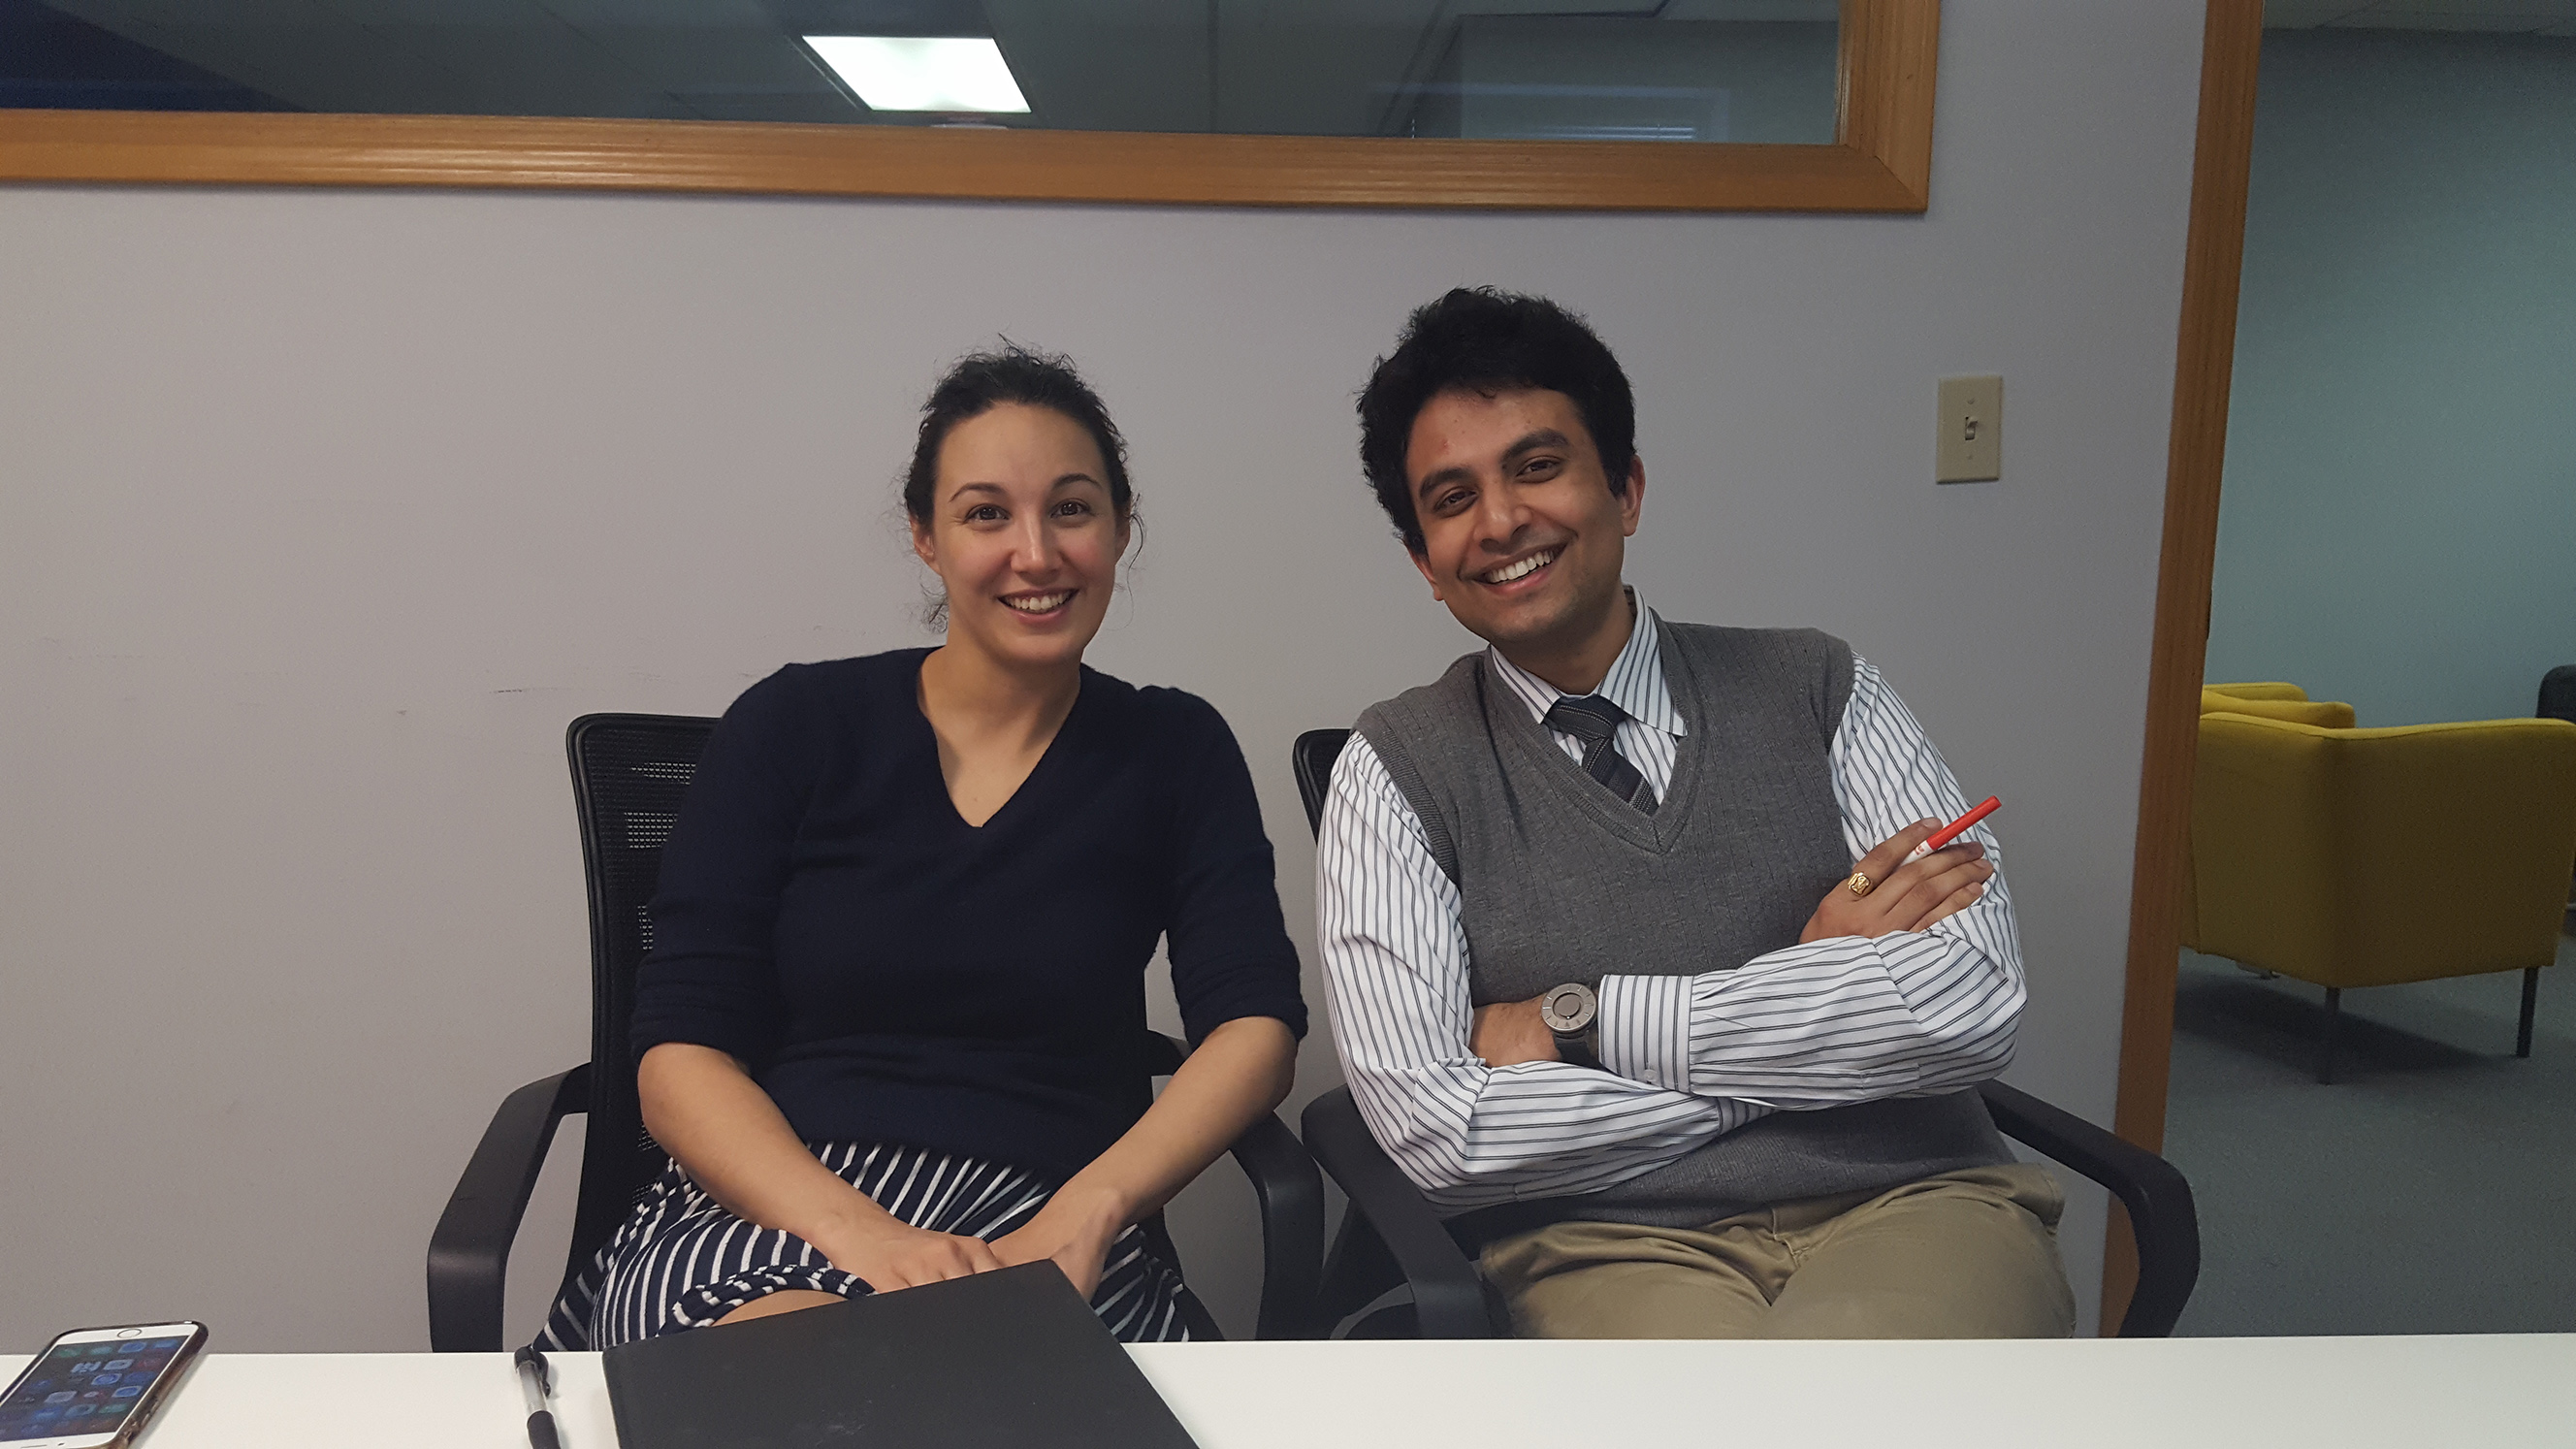 Katie Boody and Aditya Voleti of the Lean Lab in Kansas City